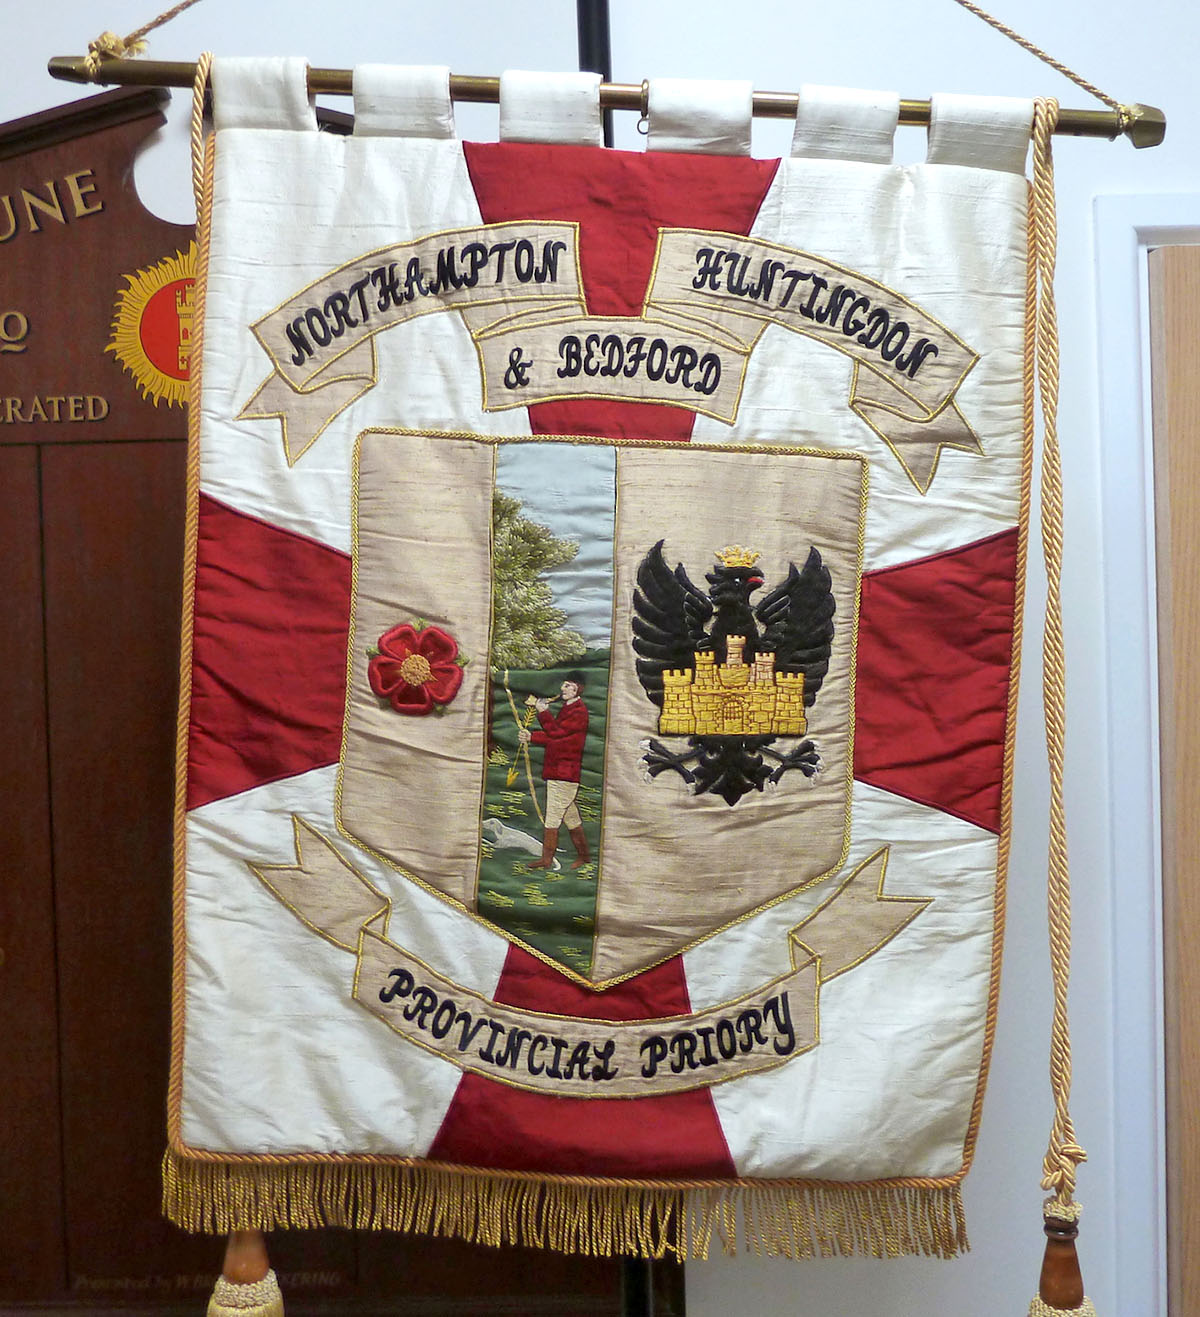 Northamptonshire, Huntington and Bedford Provincial Banner